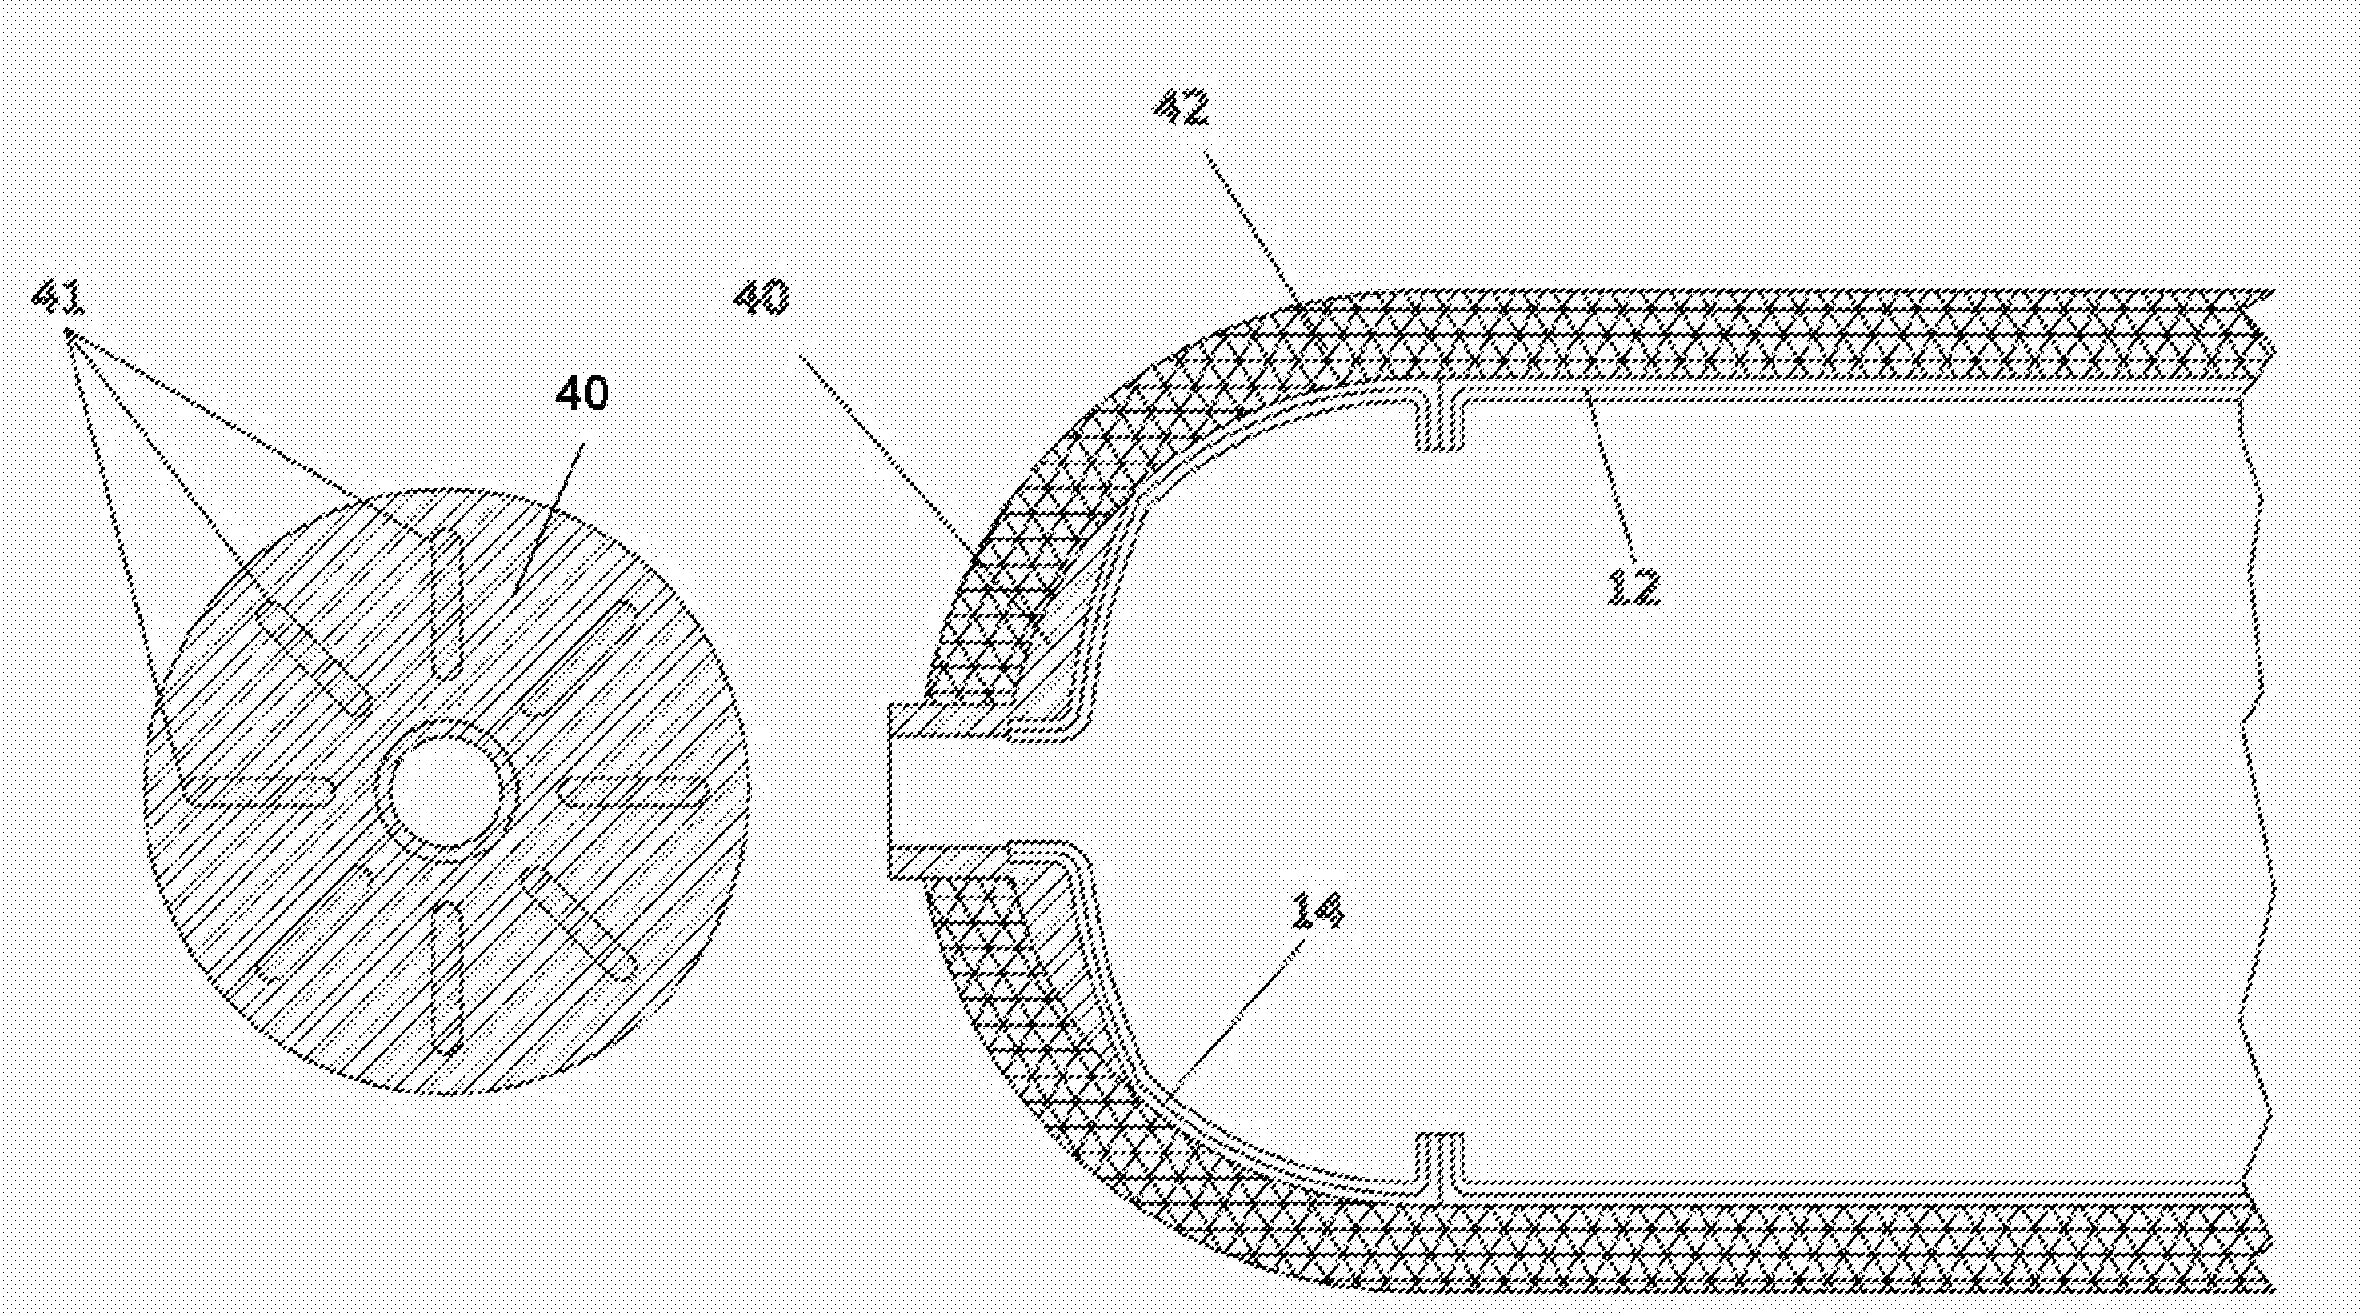 Method for Manufacturing an Inner Liner For a Storage Tank